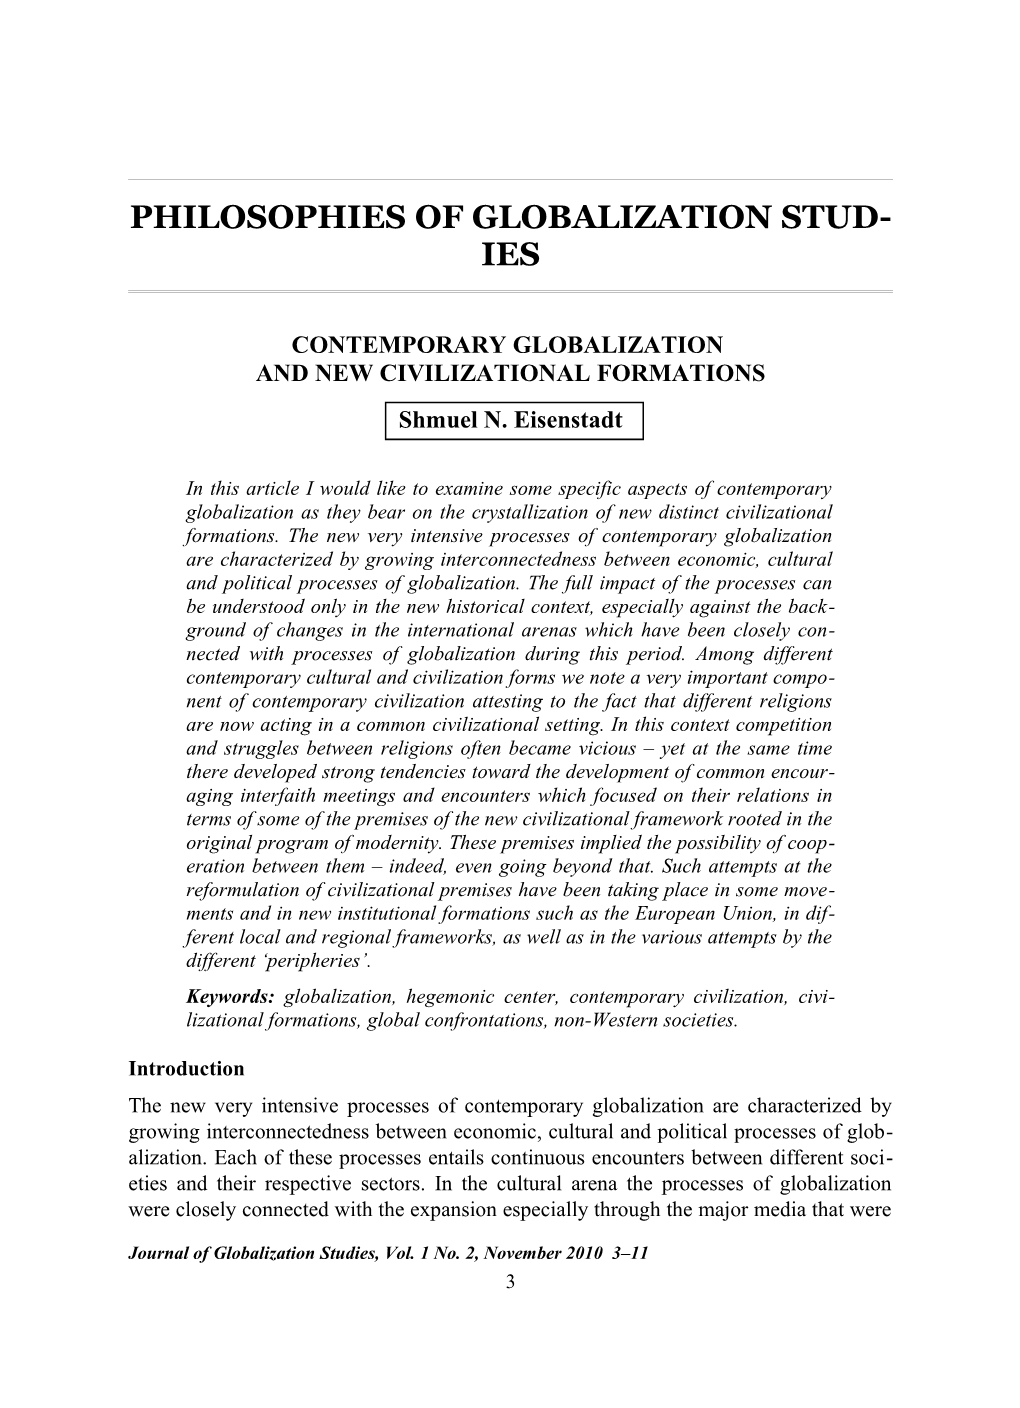 Eisenstadt Contemporary Globalization and New Civilizational Formations